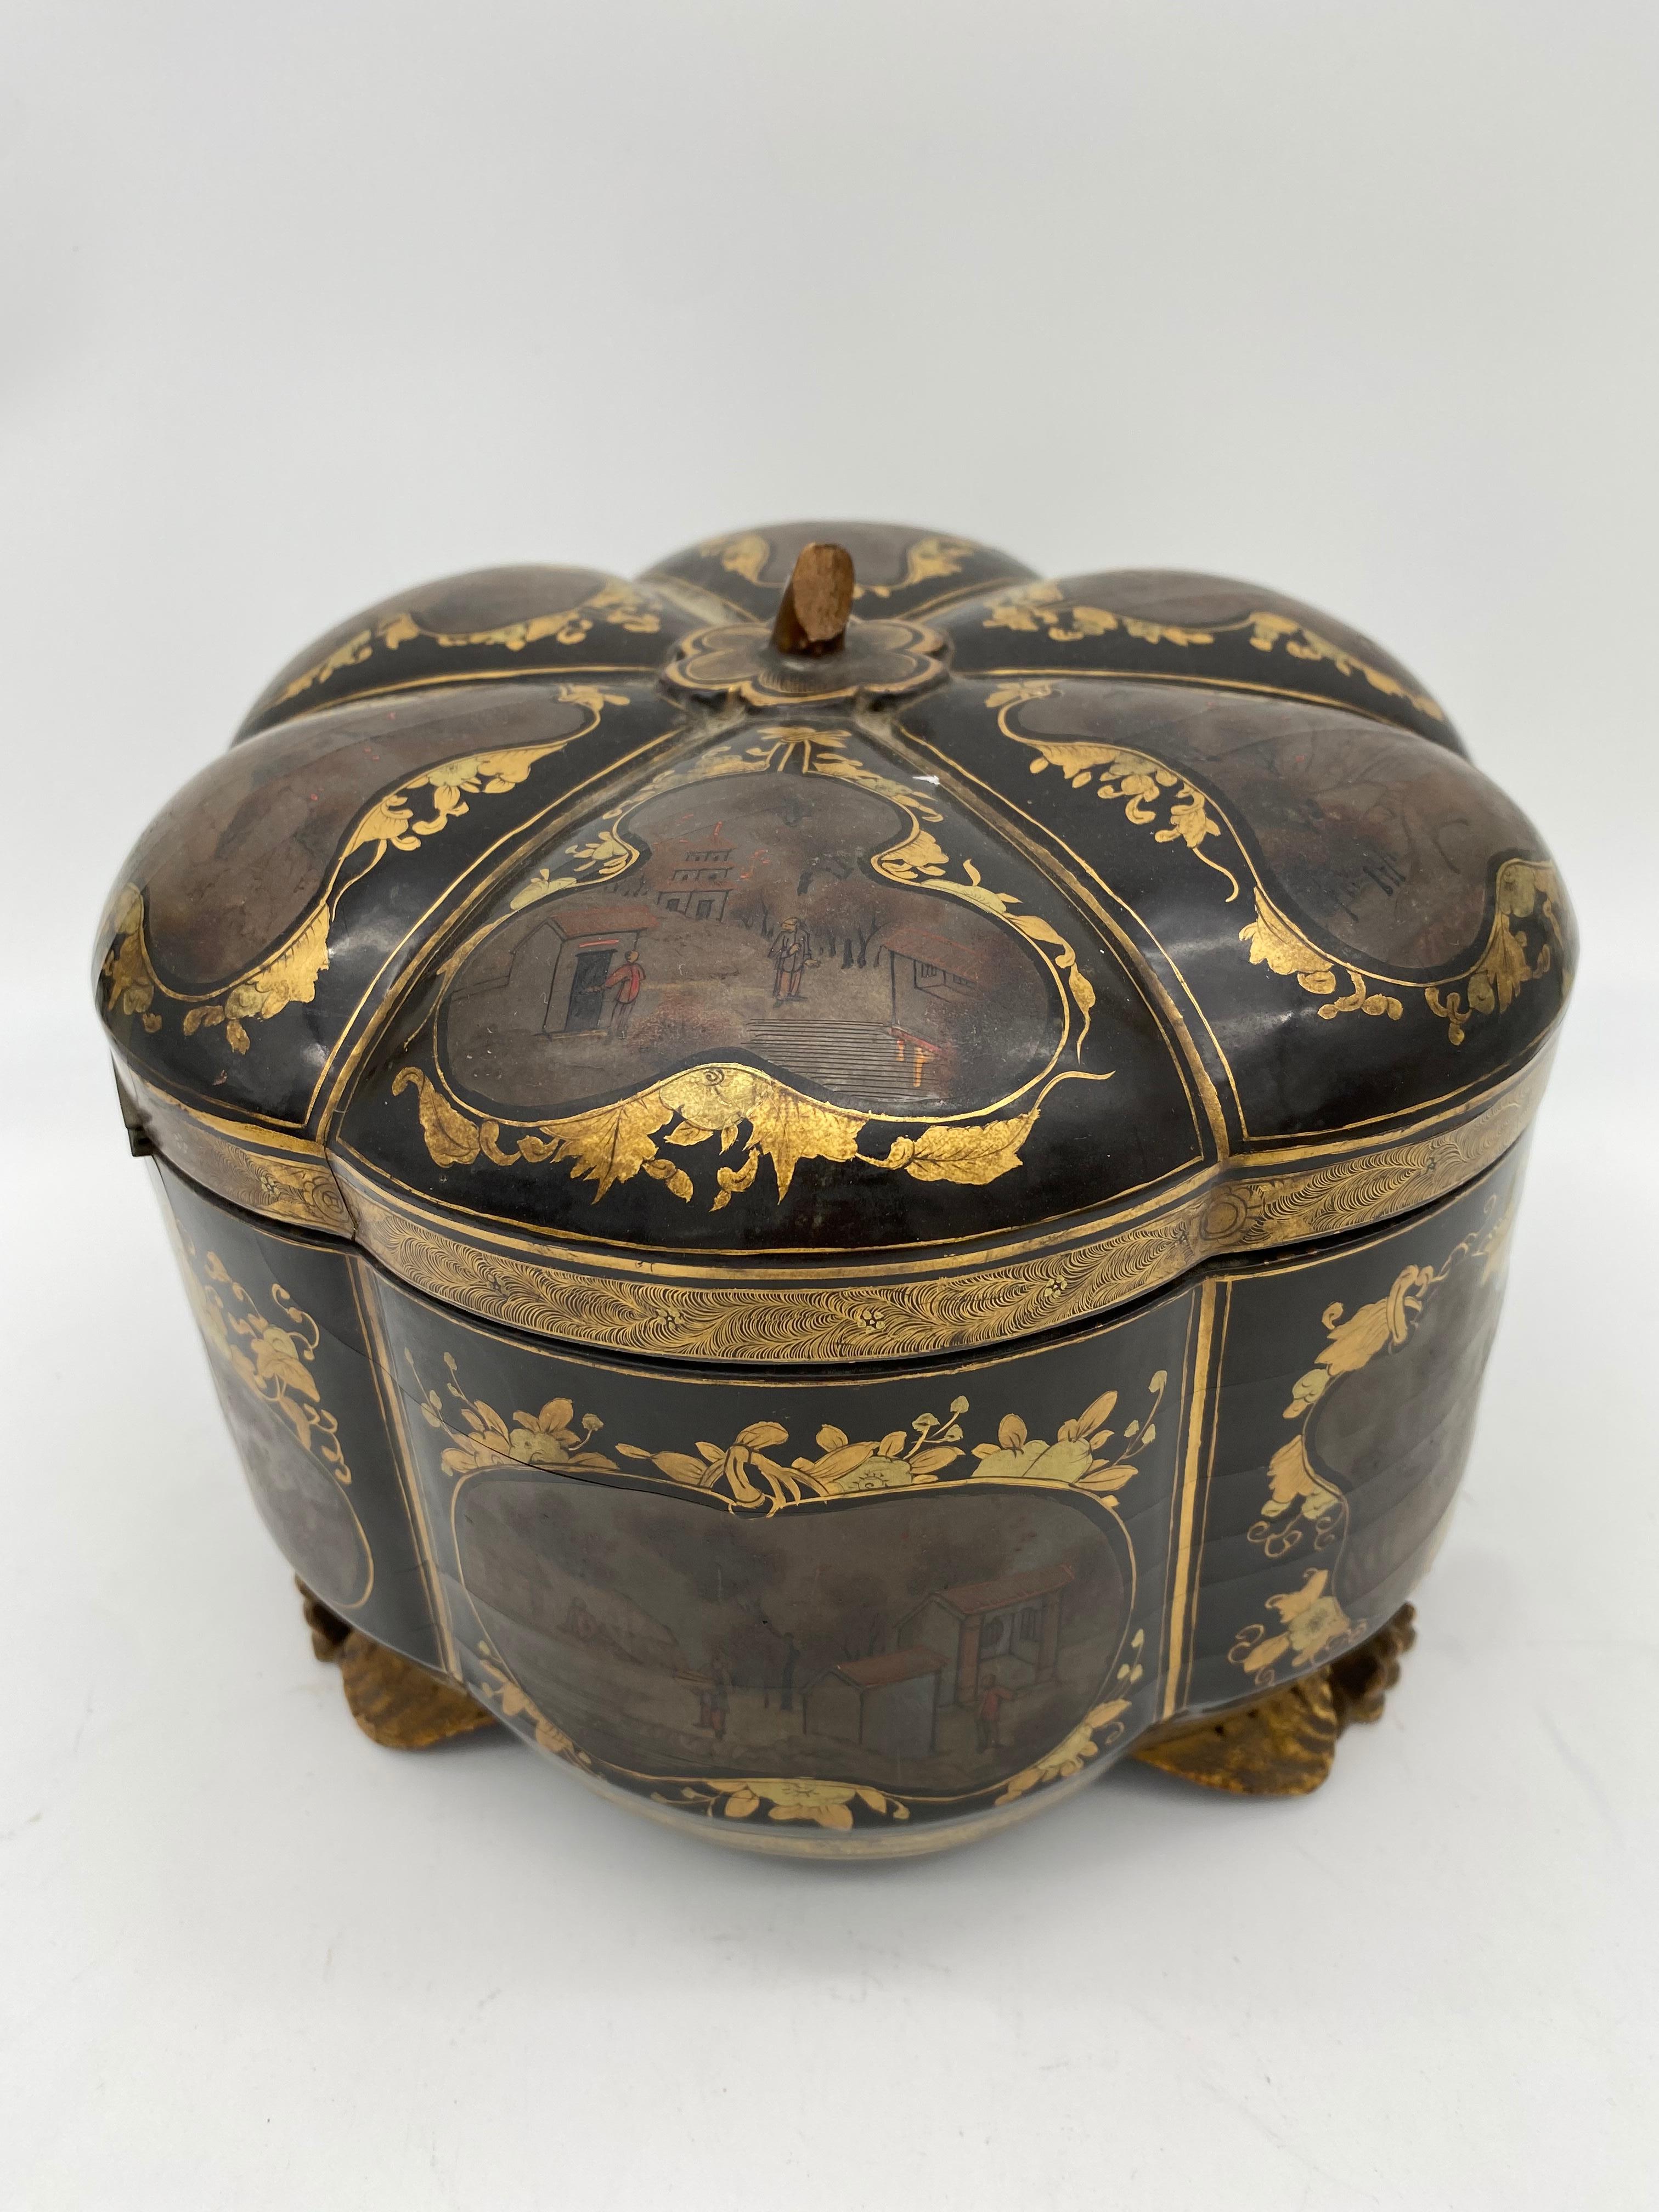 19th Century a Unique Gilt Chinese Lacquer Tea Caddy For Sale 1